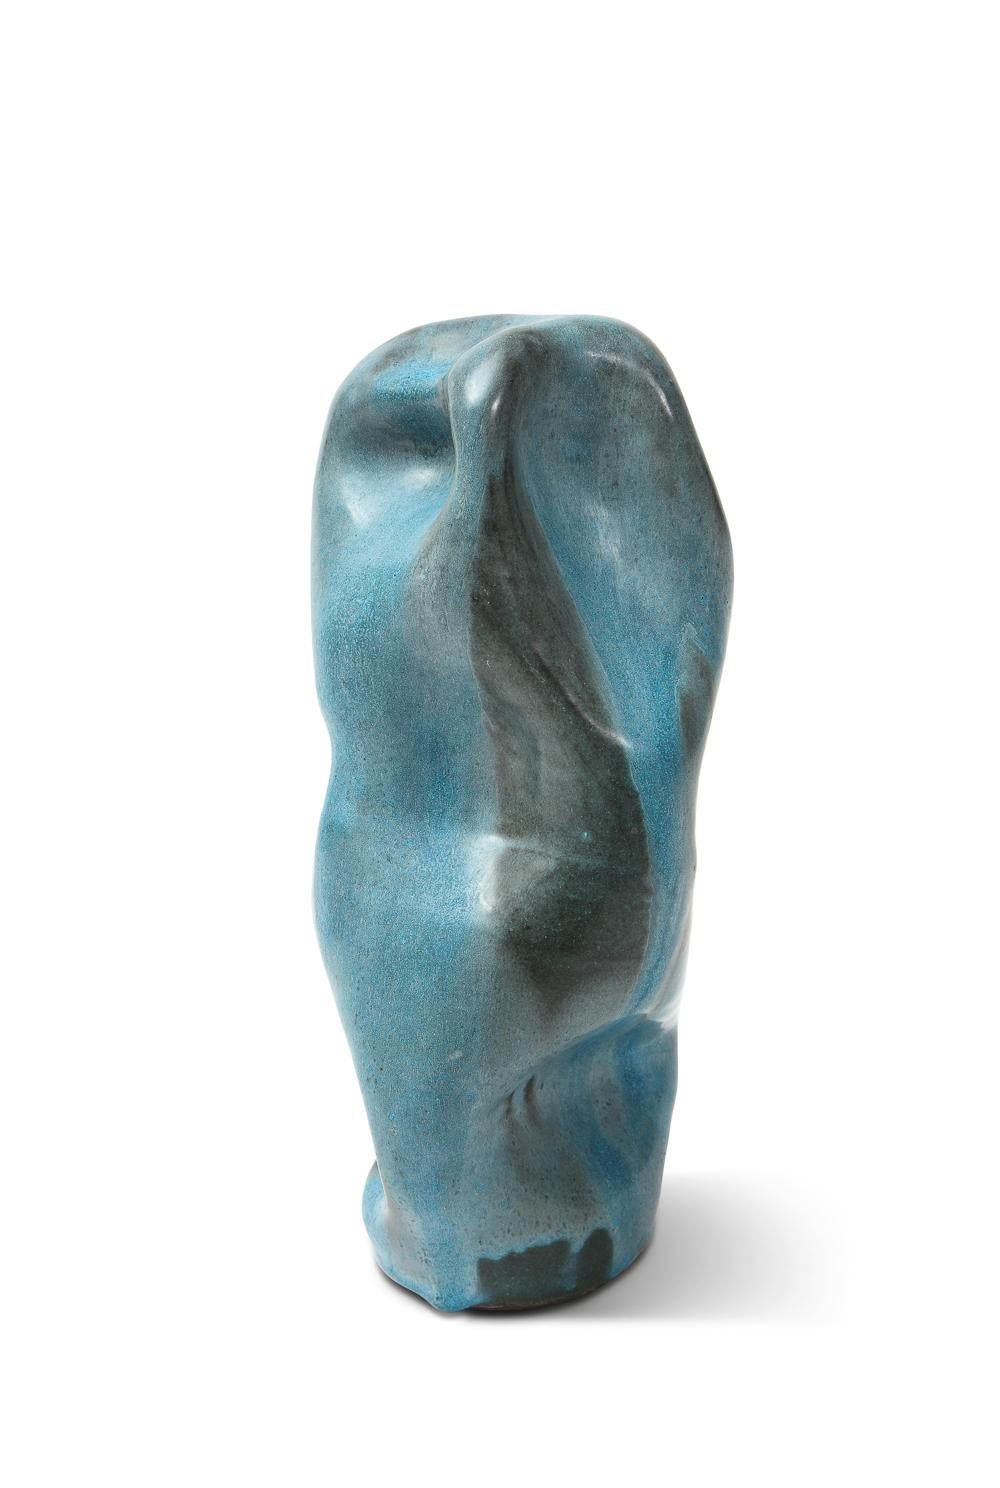 Totem sculpture with folds #2 by David Haskell. Ceramic sculpture with blue glazes.